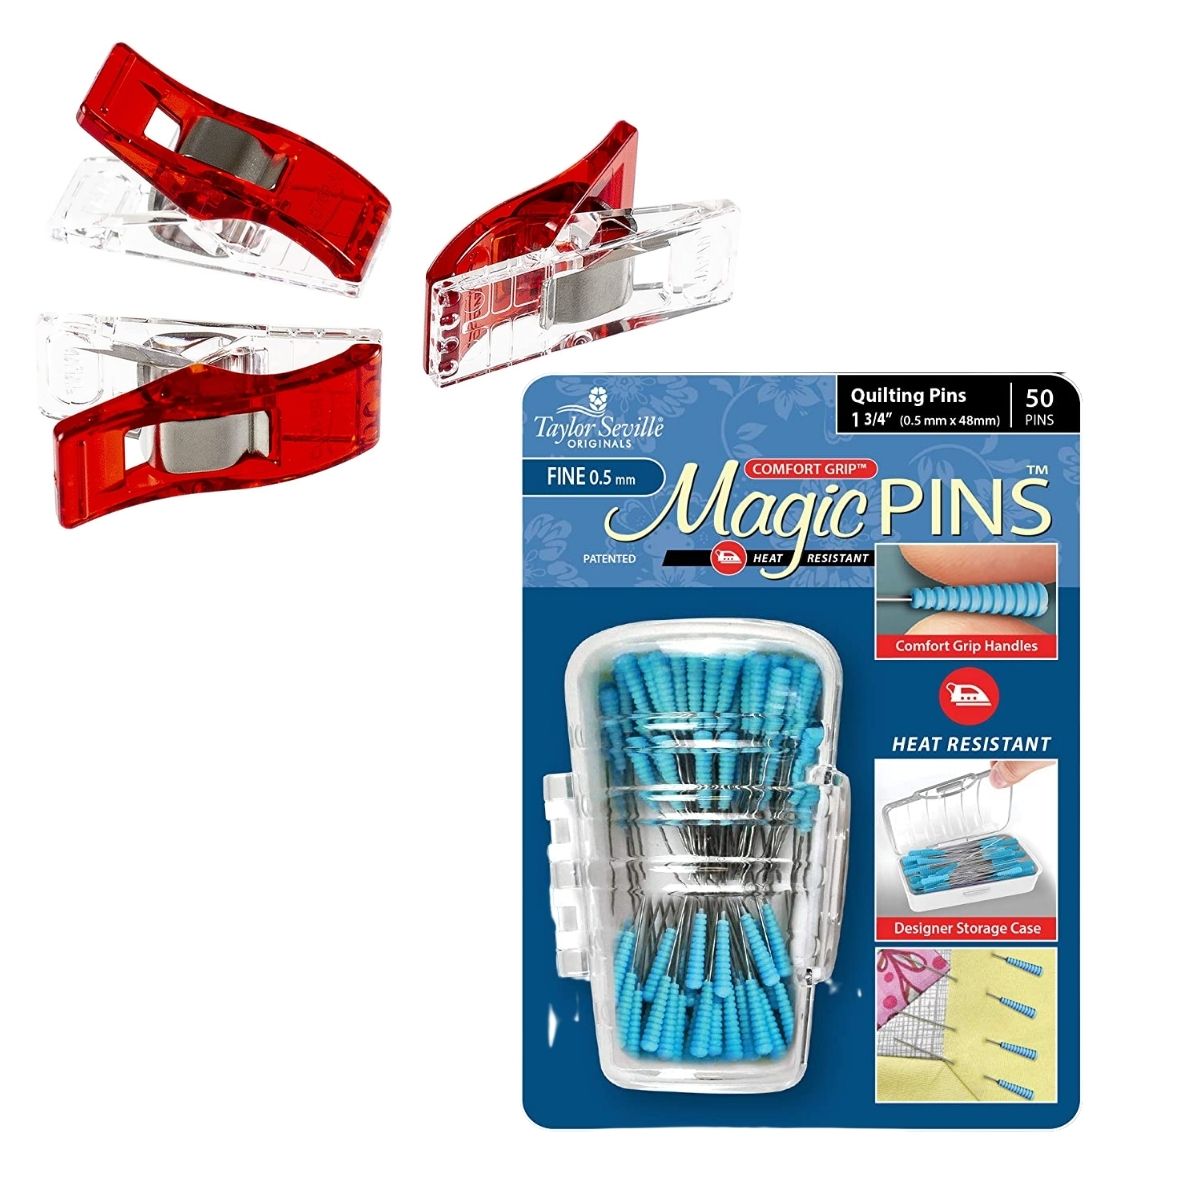 three red sewing clips next to a package of sewing pins with blue rubber heads